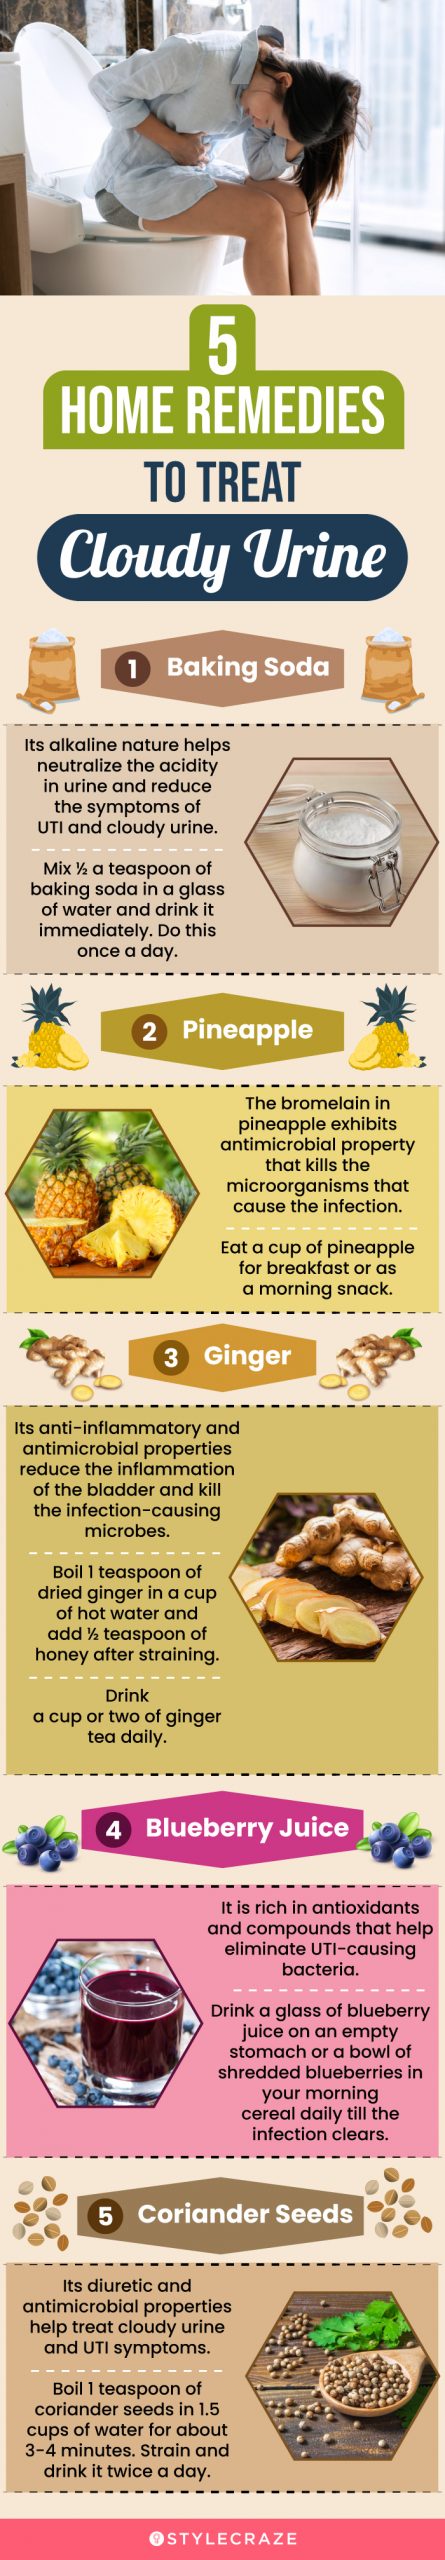 5 home remedies to treat cloudy urine (infographic)